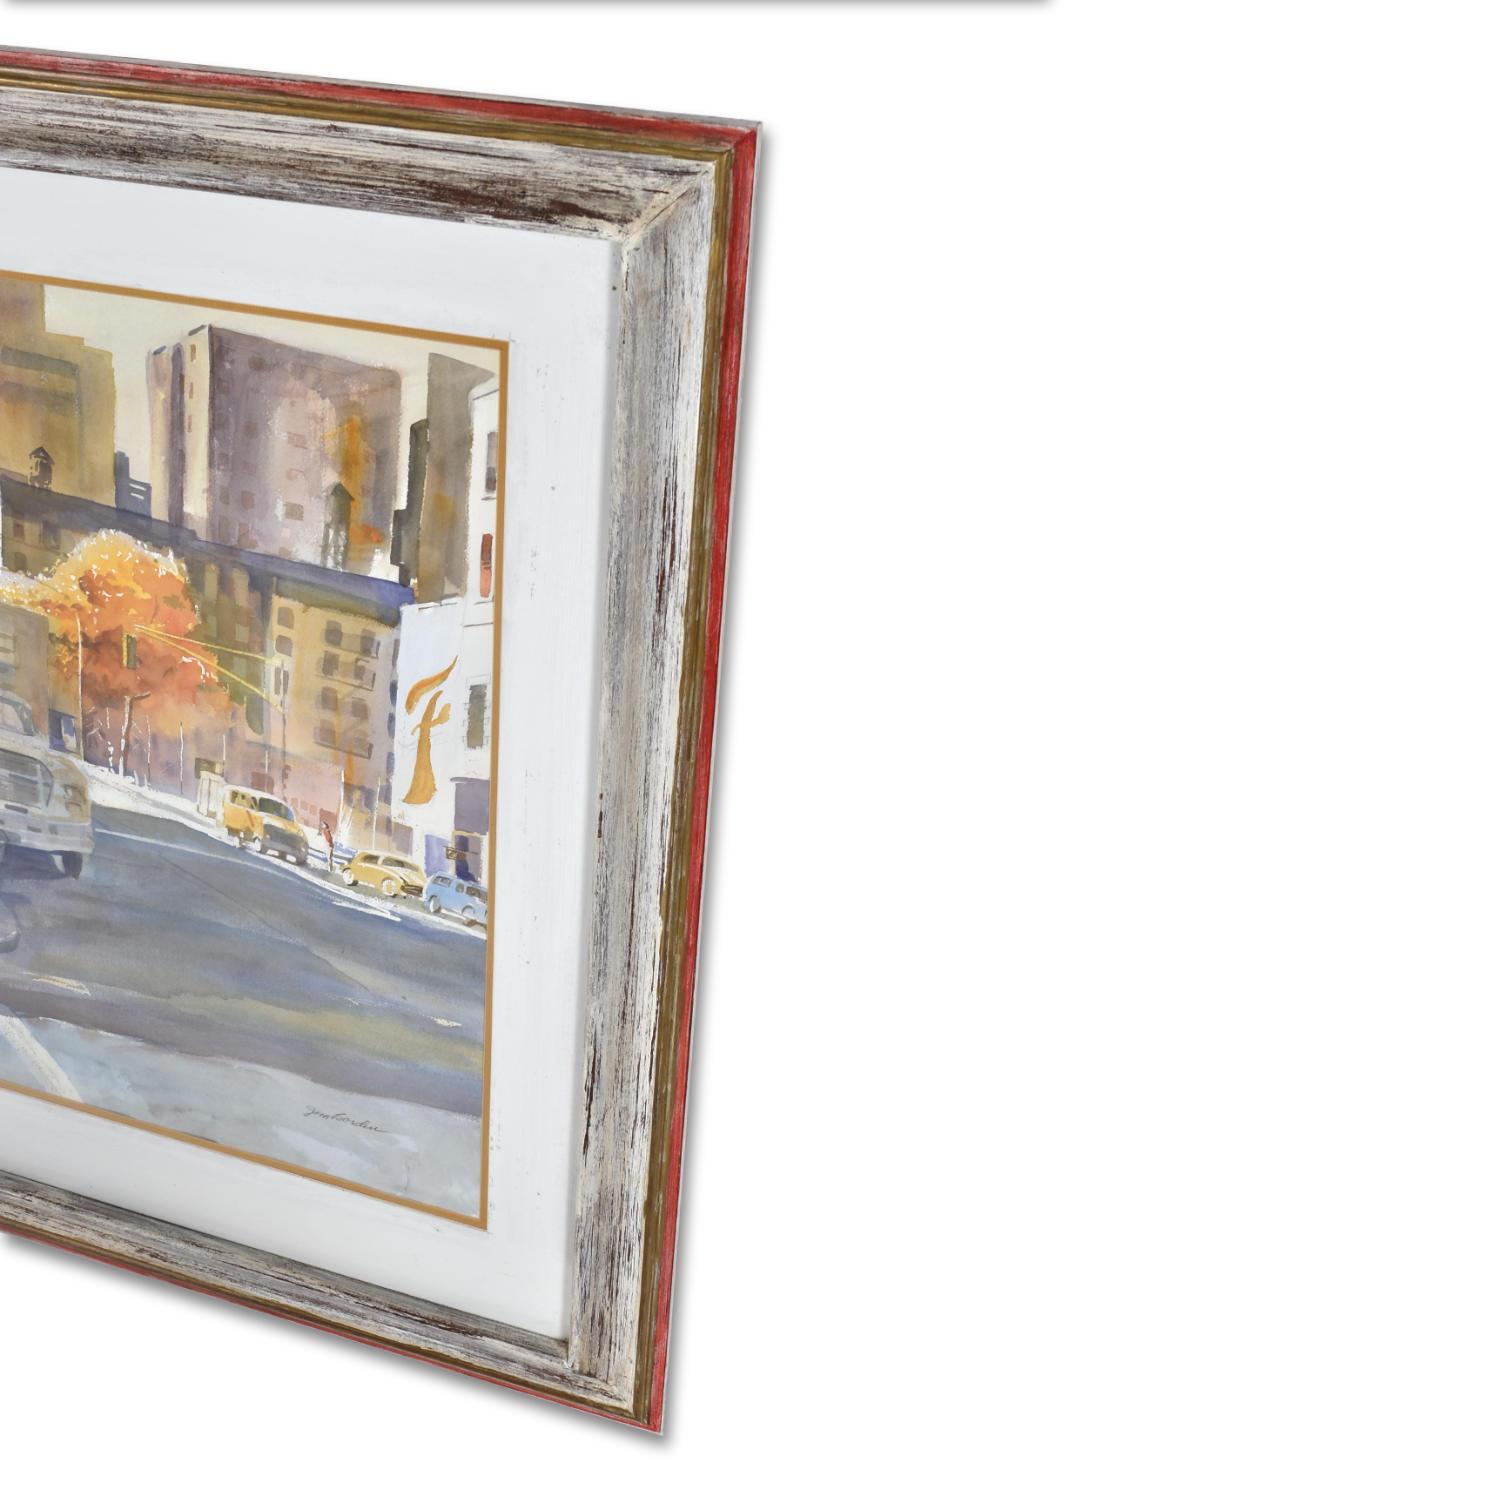 James C. Borden Large Cityscape Street Scene Watercolor Painting Cerused Frame For Sale 2